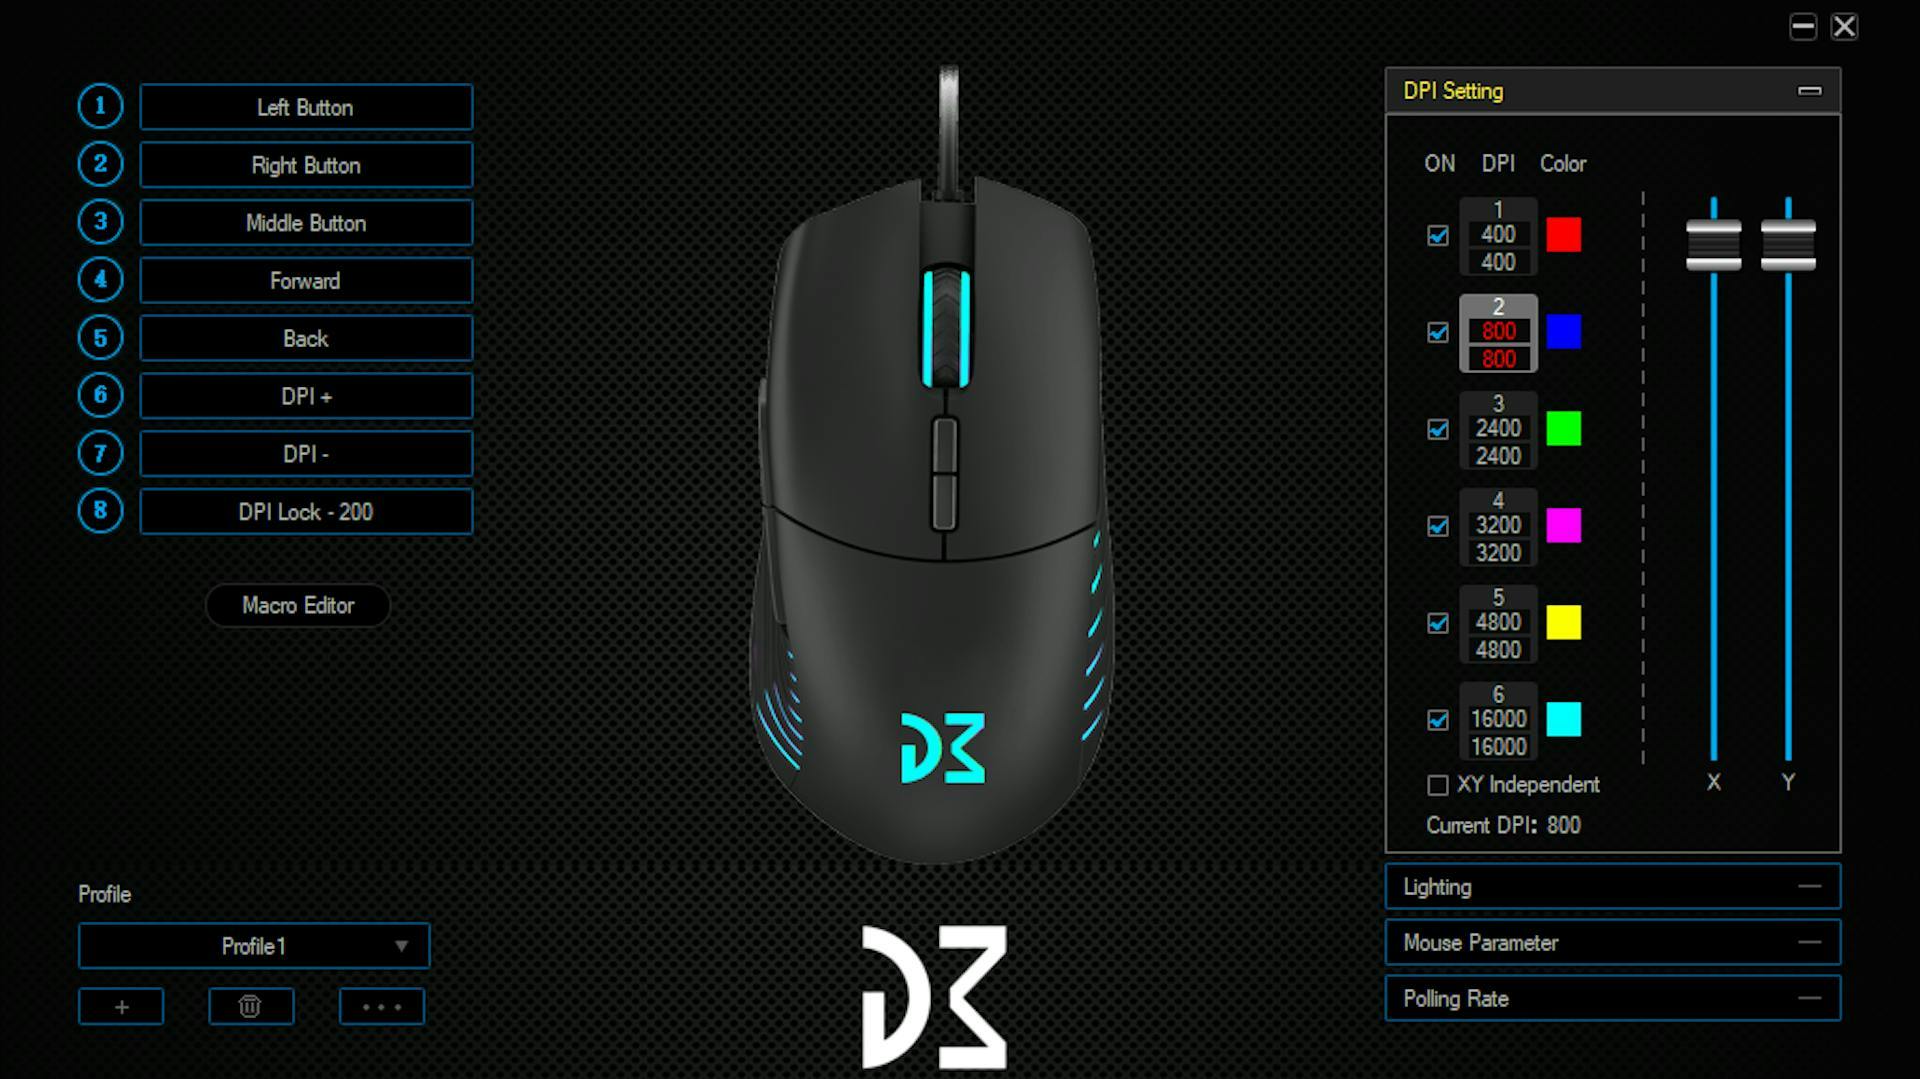 A gaming mouse software with the DPI settings in the foreground. | Credit: Dream Machines.